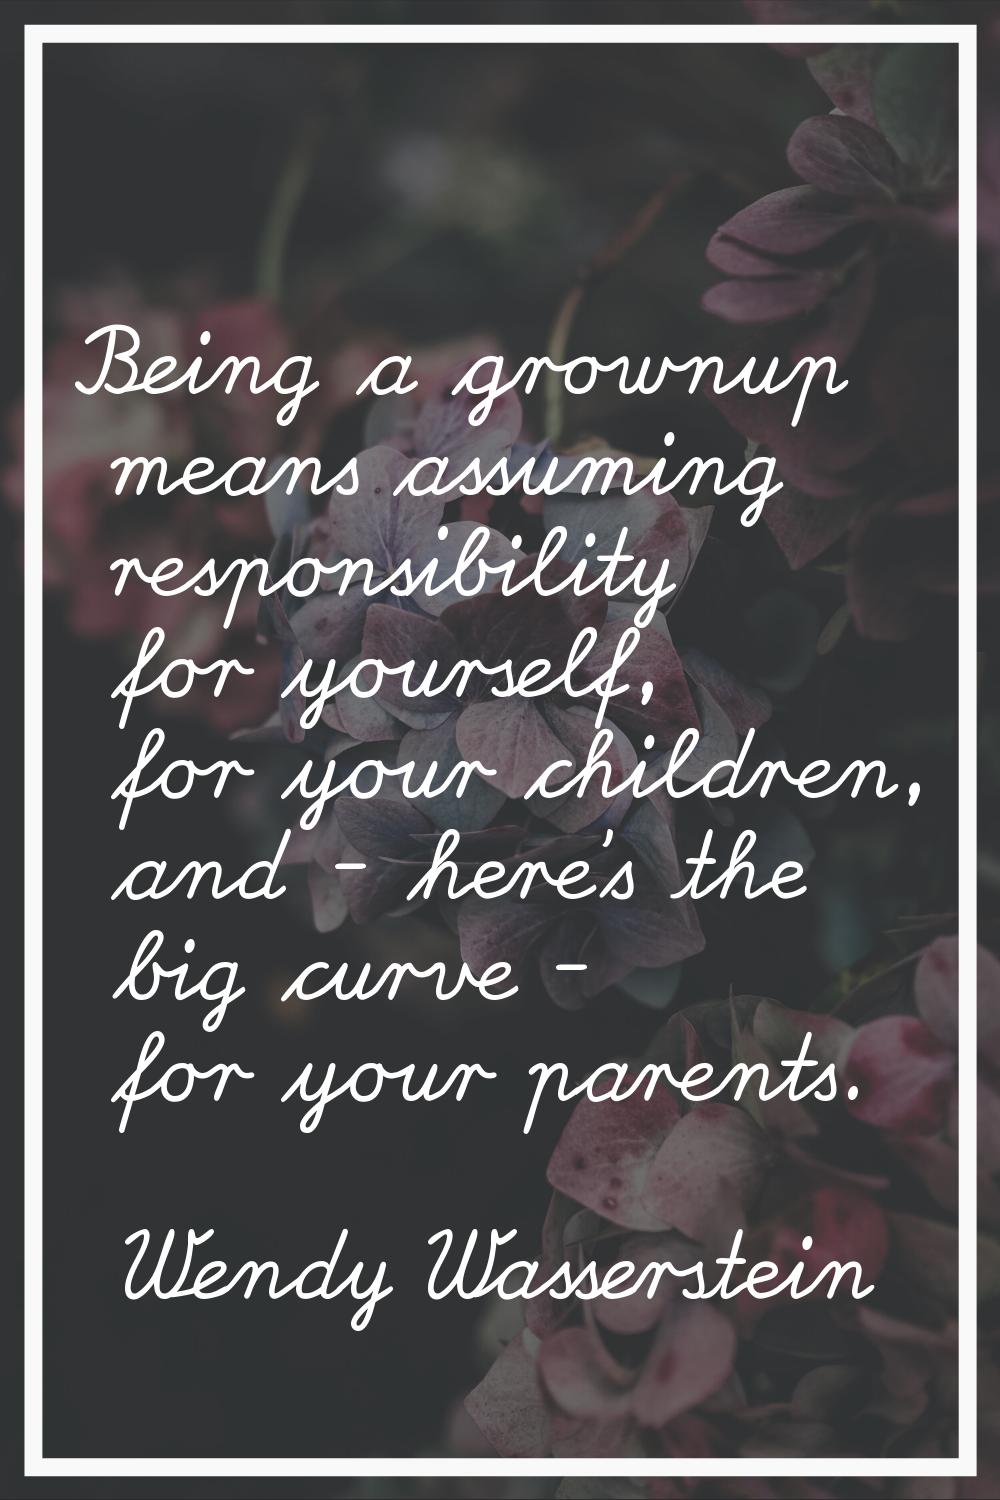 Being a grownup means assuming responsibility for yourself, for your children, and - here's the big